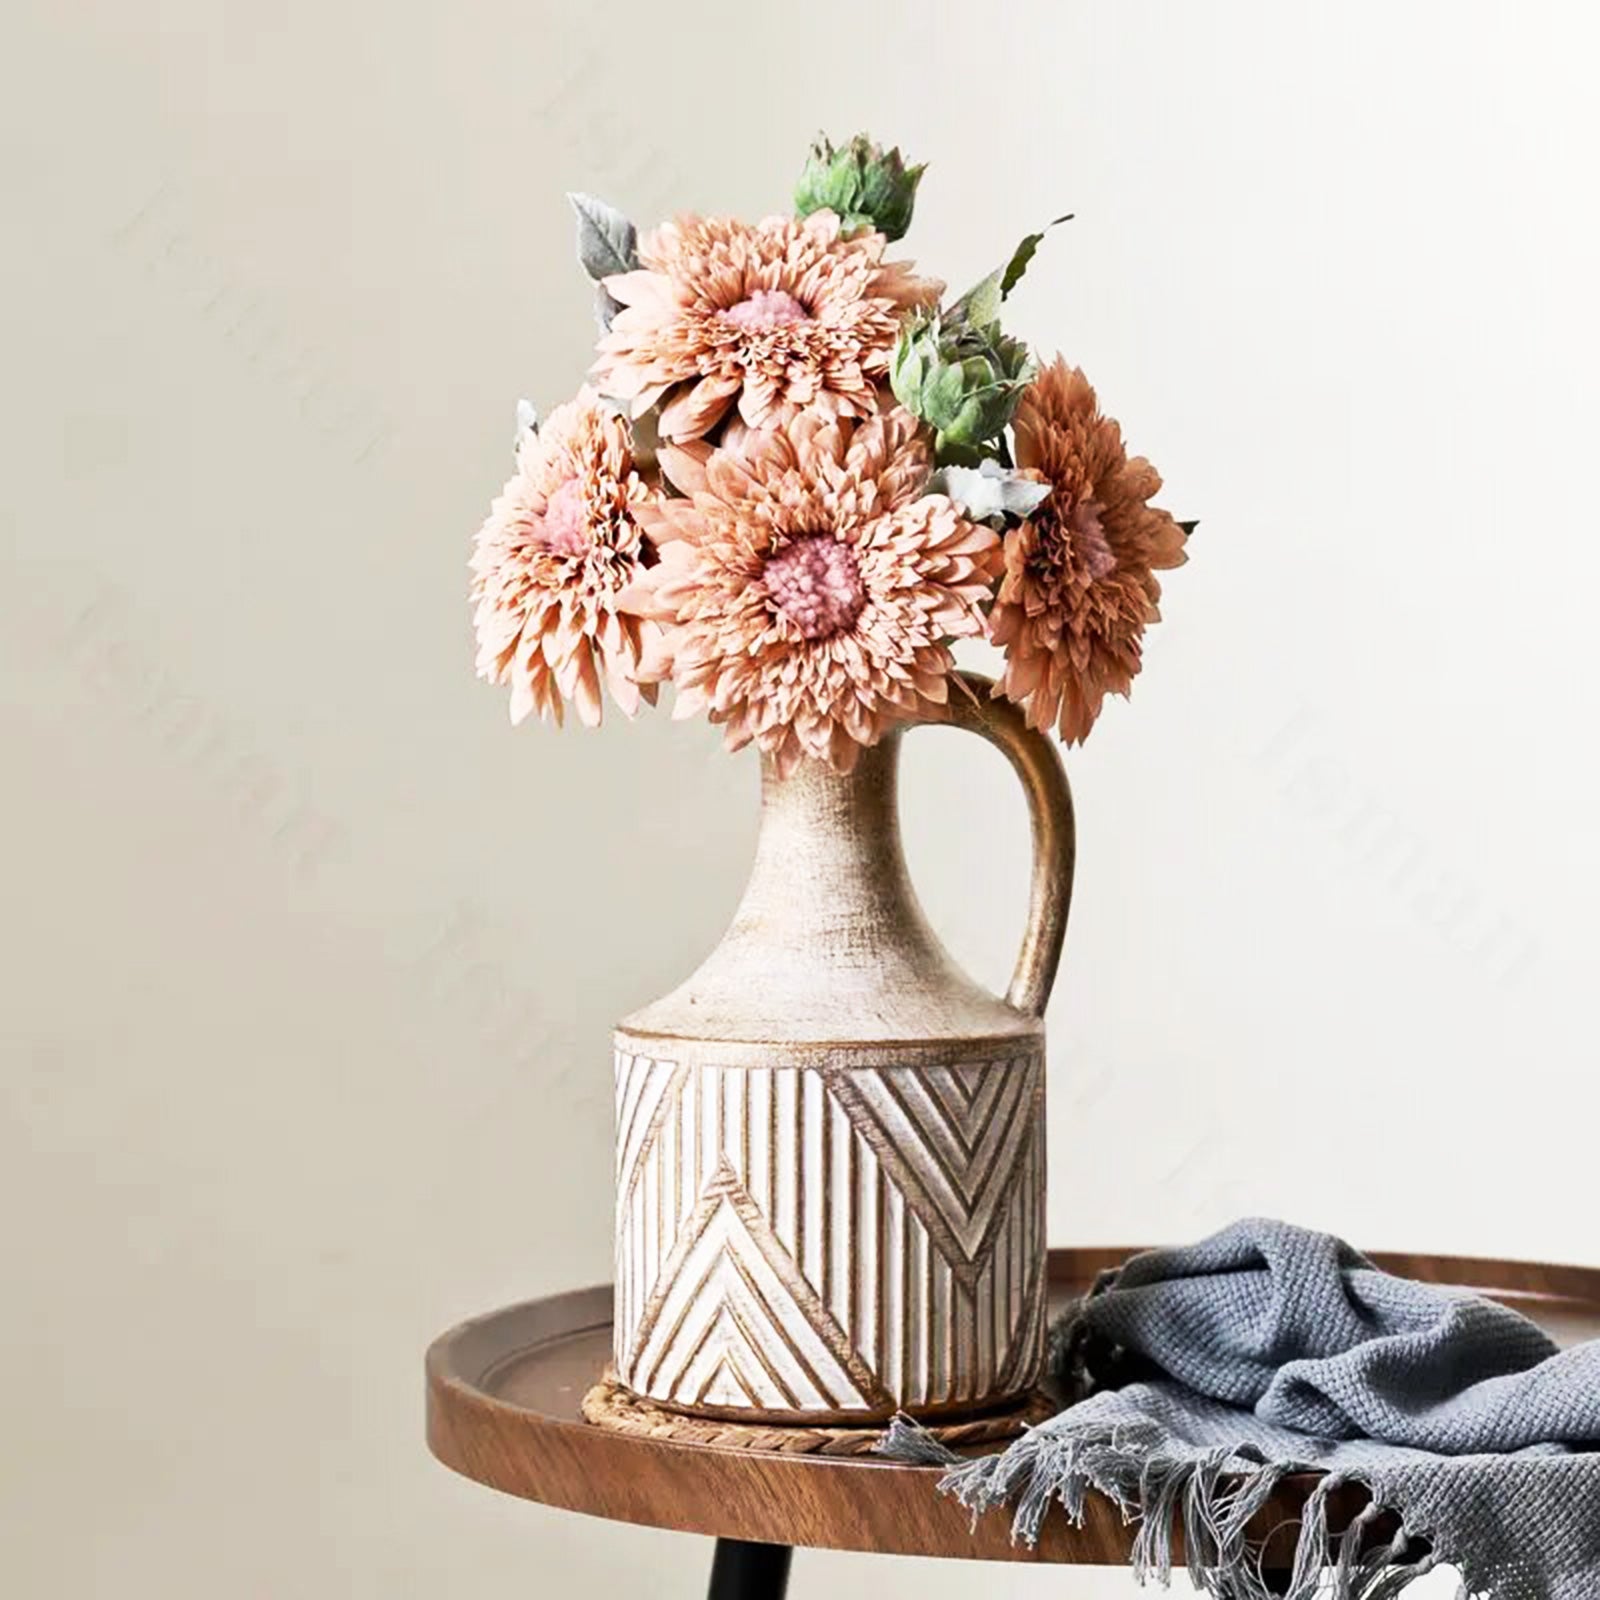 Rustic Look Retro Vase with Bold Striped Pattern